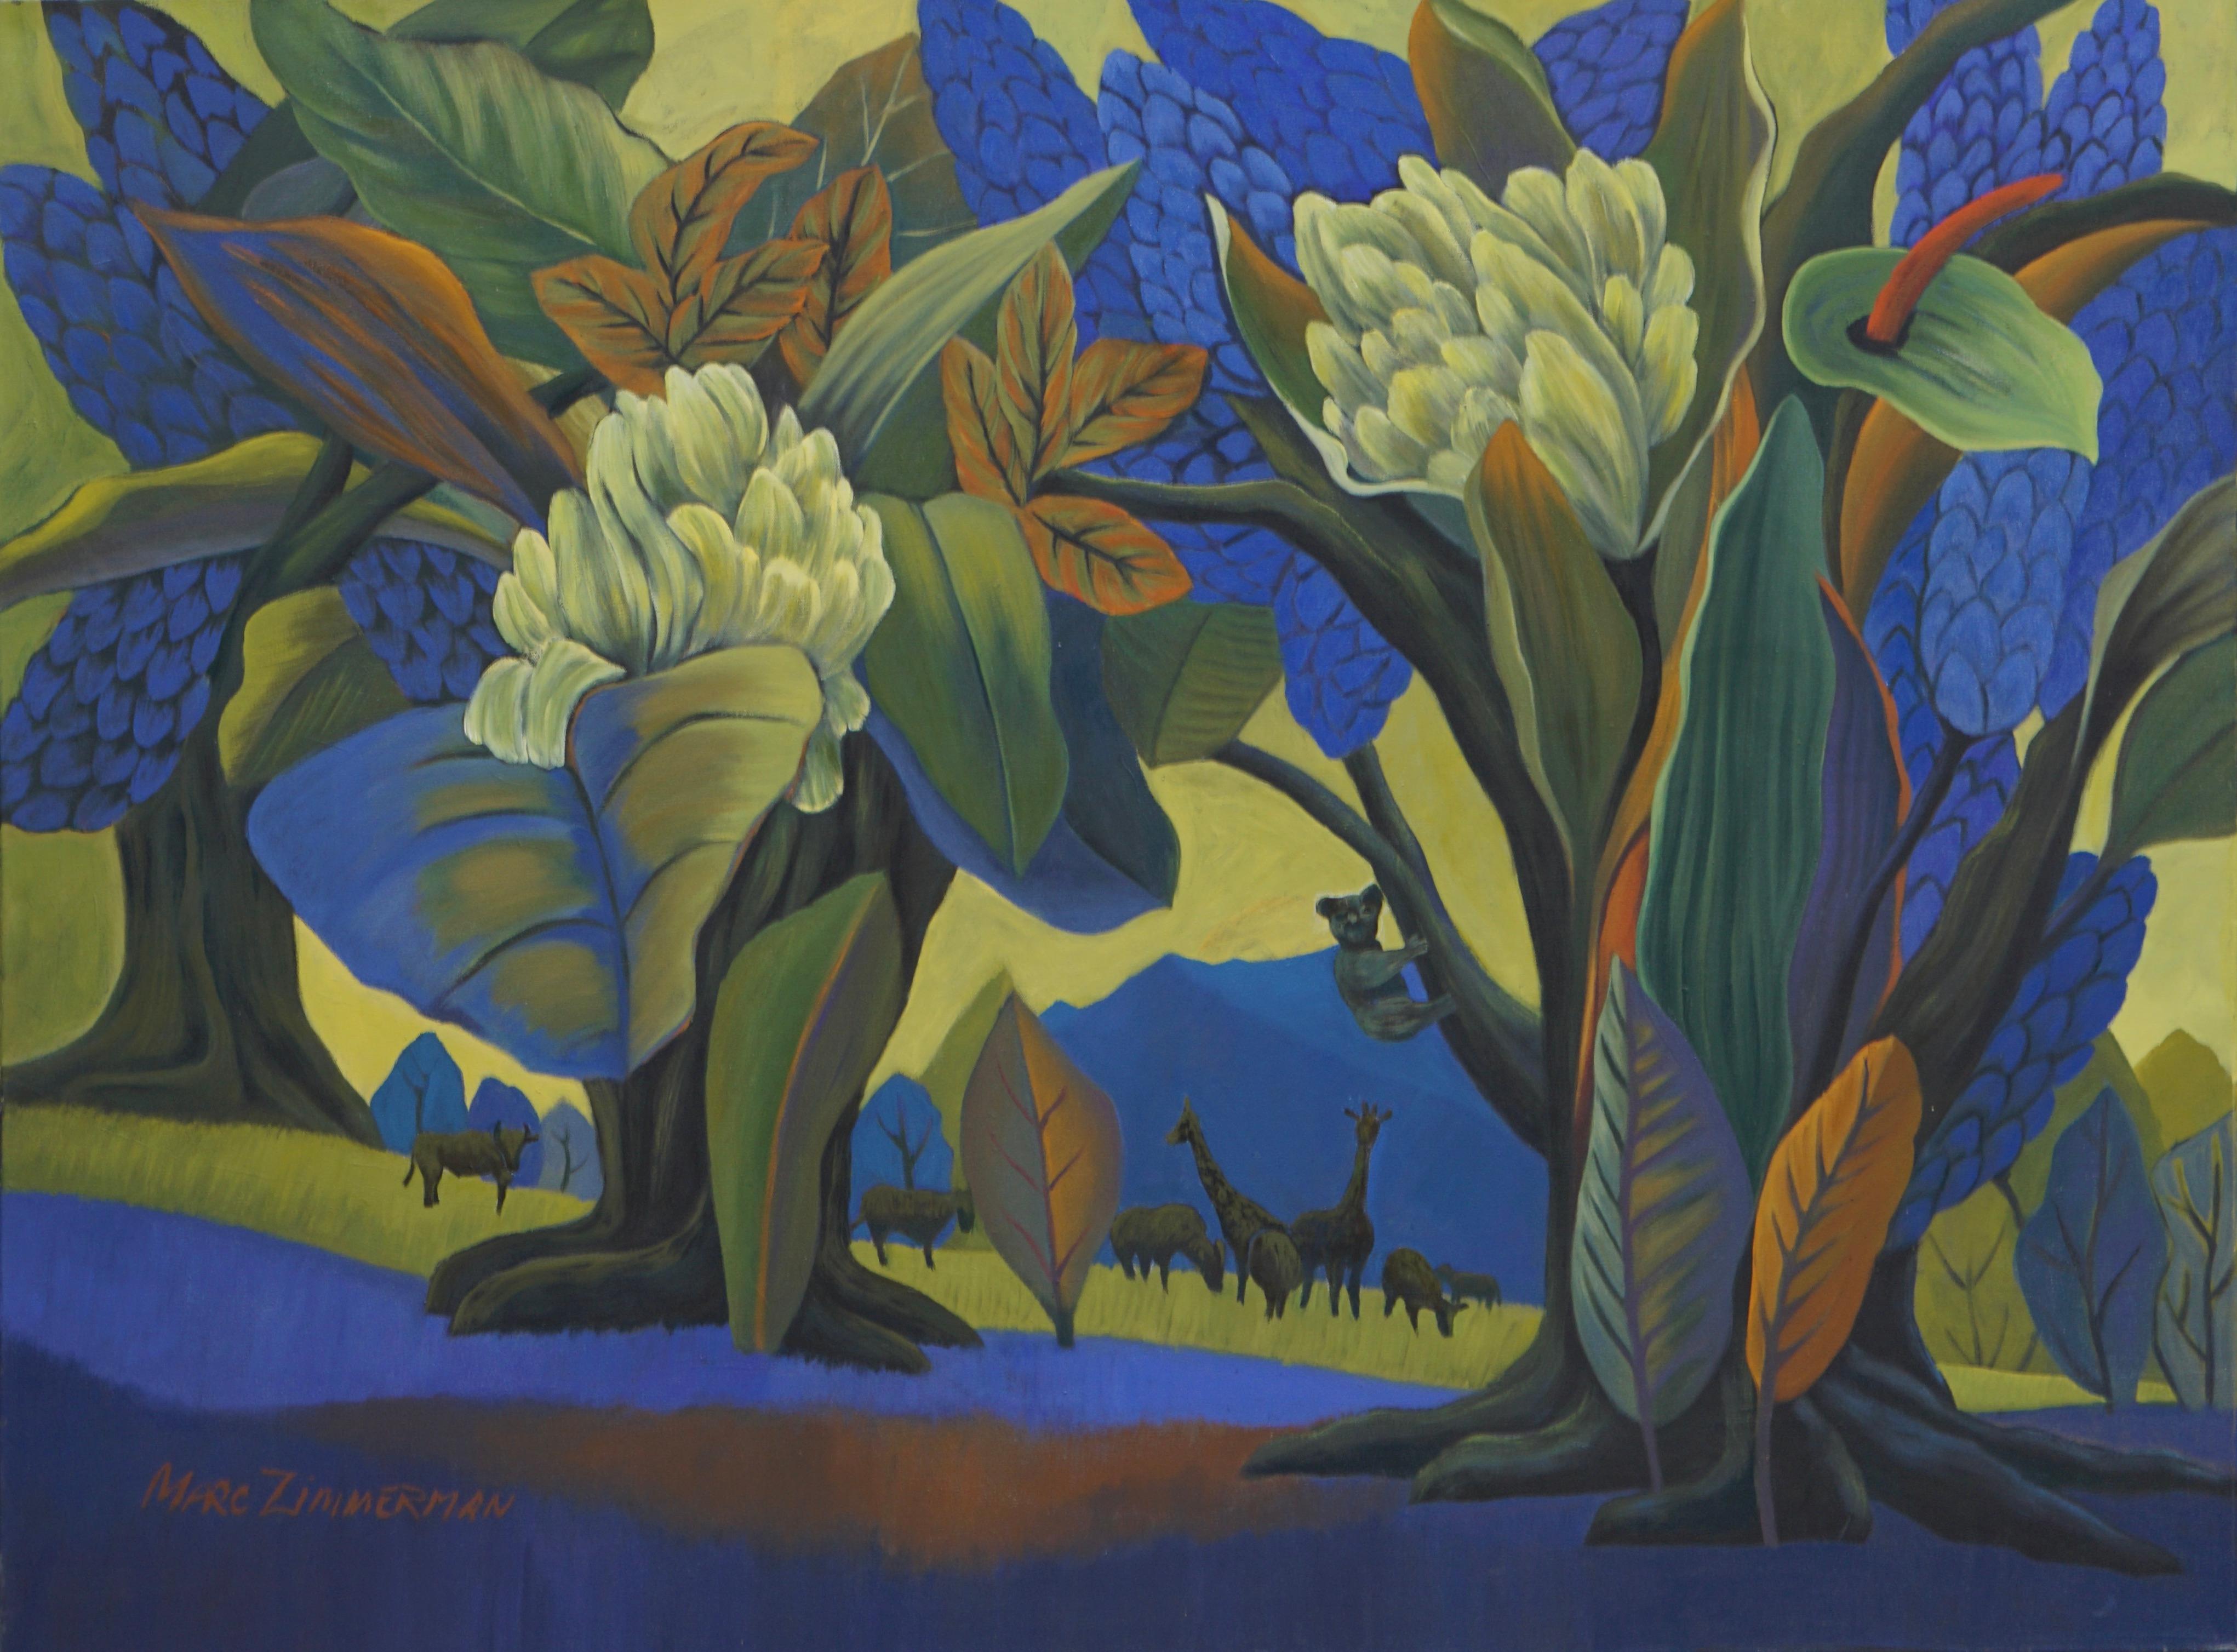 In an abstract forest meadow exotic animals contentedly graze. The trees are lush with inventive surreal flowers and leaves.

Landscape in Blue - Animal Paintings - Conceptual Art By Marc Zimmerman

This masterpiece is exhibited in the Zimmerman